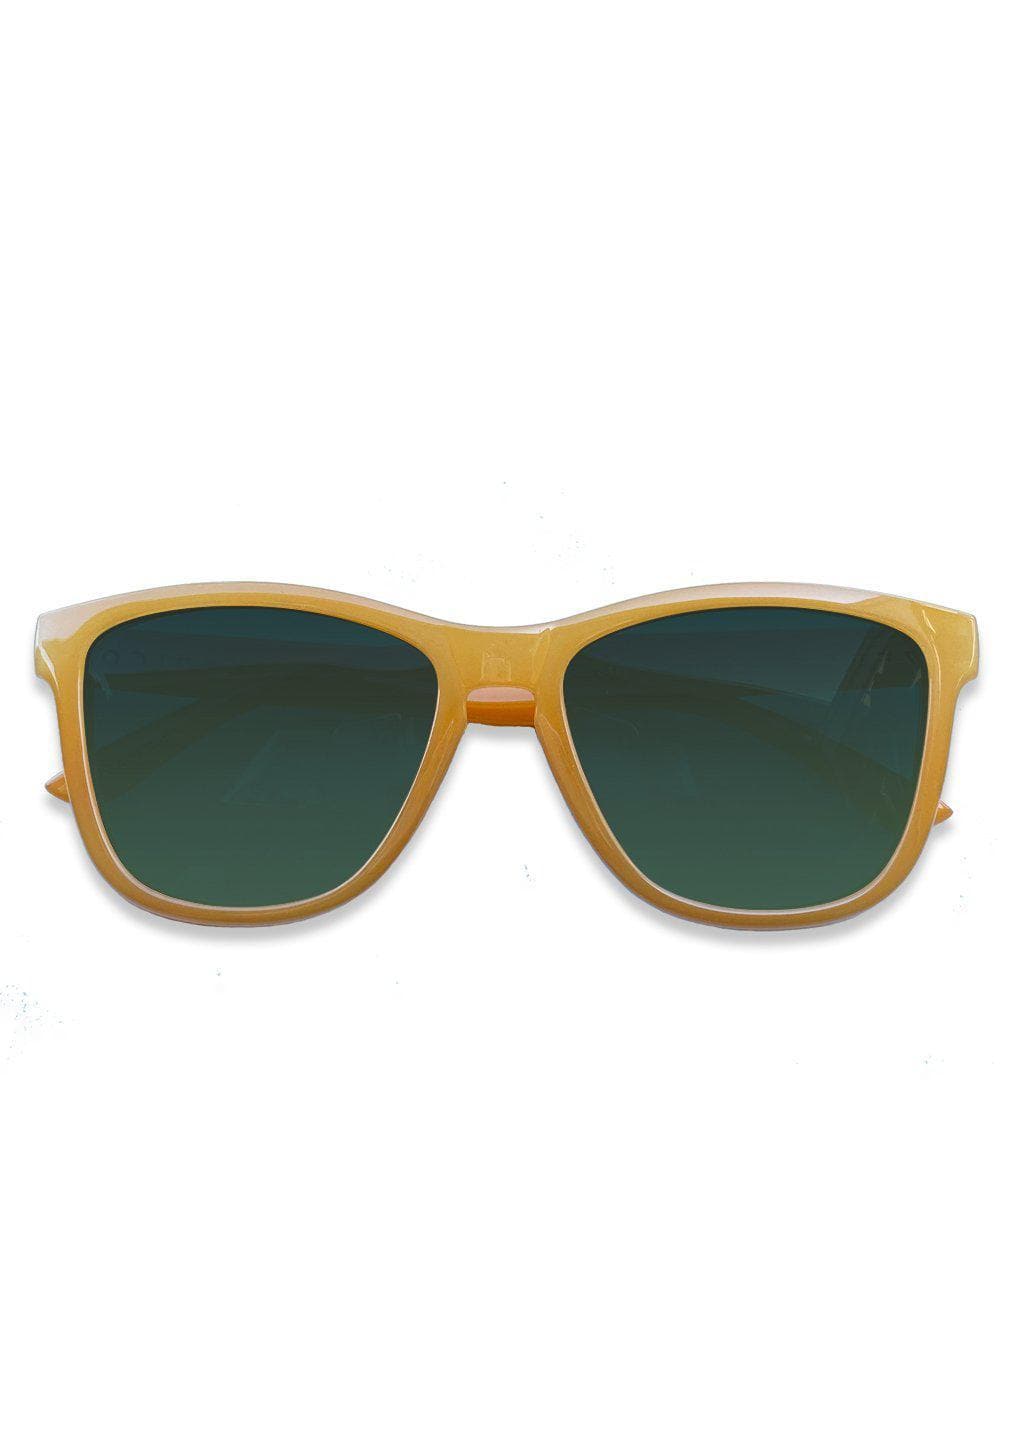 Our Mood V2 is an improved version of our last wayfarers. Plastic body for great quality and durabilty. This is Lemon with yellow frame and green lenses. From the front.